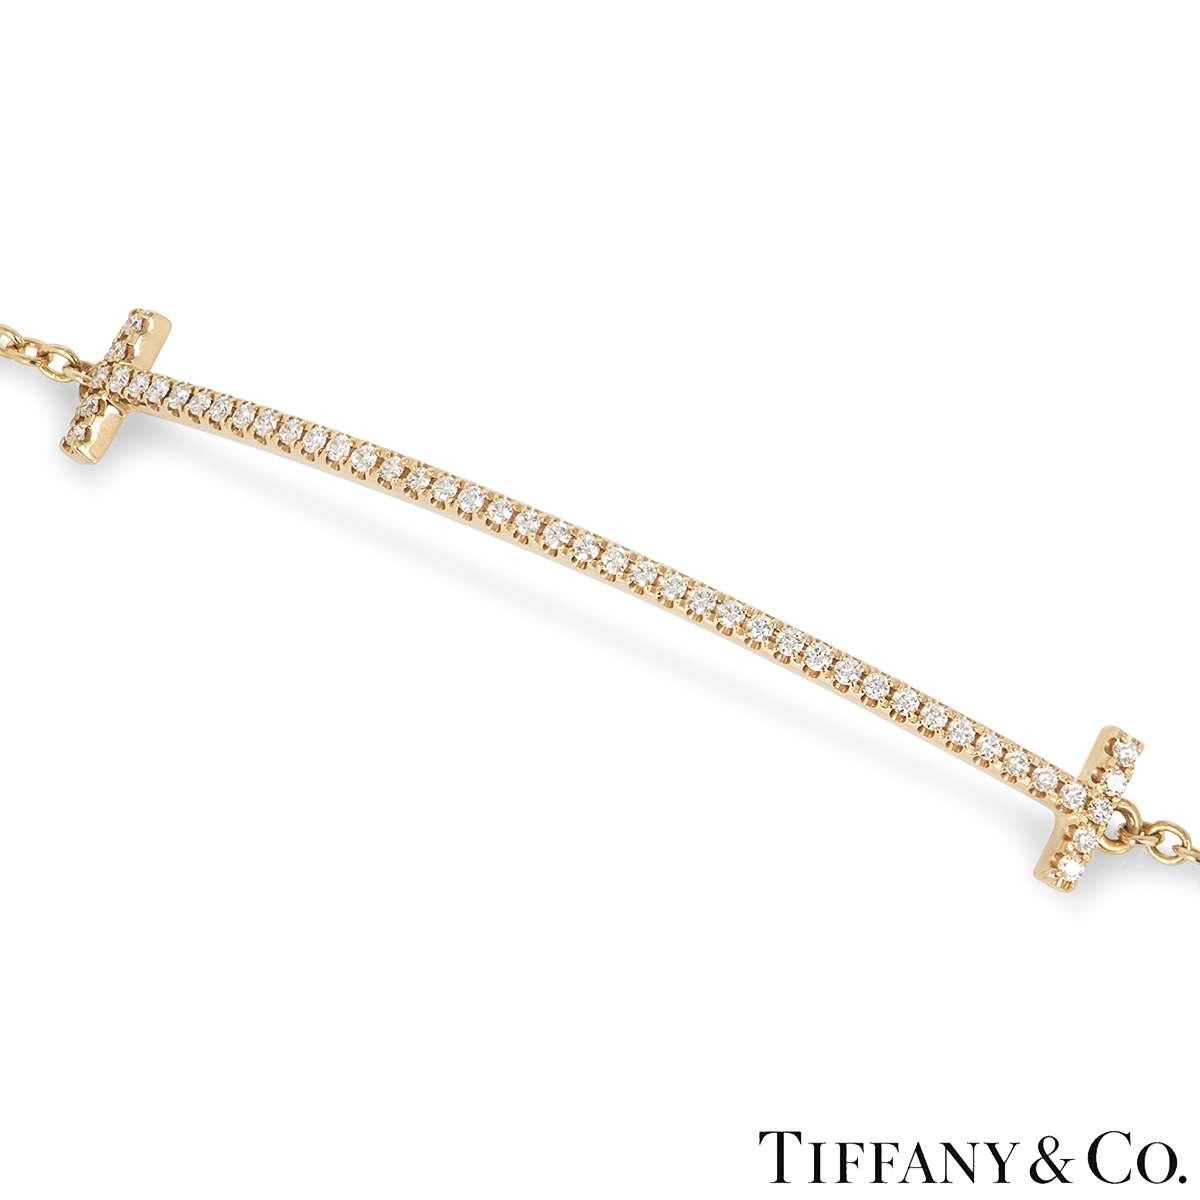 Tiffany & Co. Rose Gold Tiffany T Diamond Bracelet In Excellent Condition For Sale In London, GB